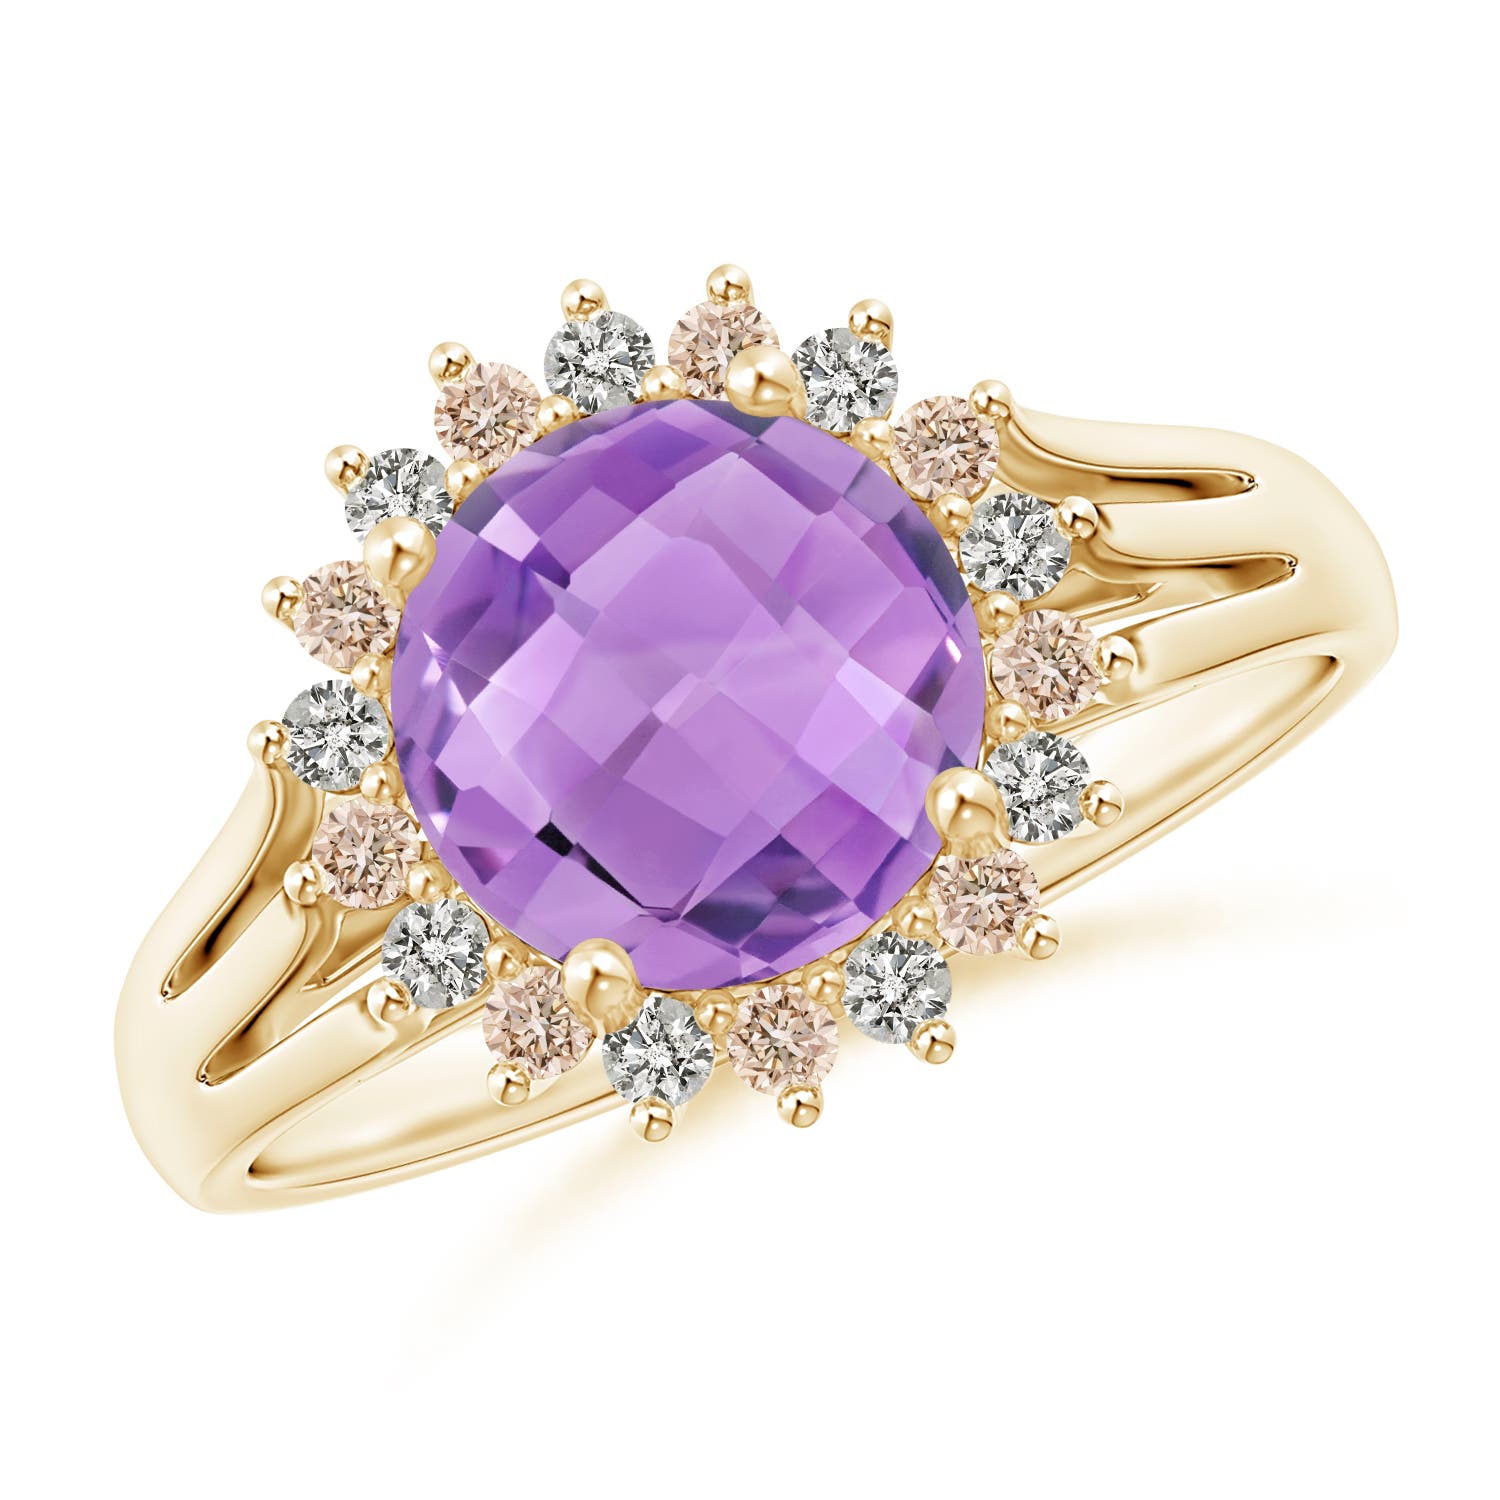 A - Amethyst / 2.1 CT / 14 KT Yellow Gold